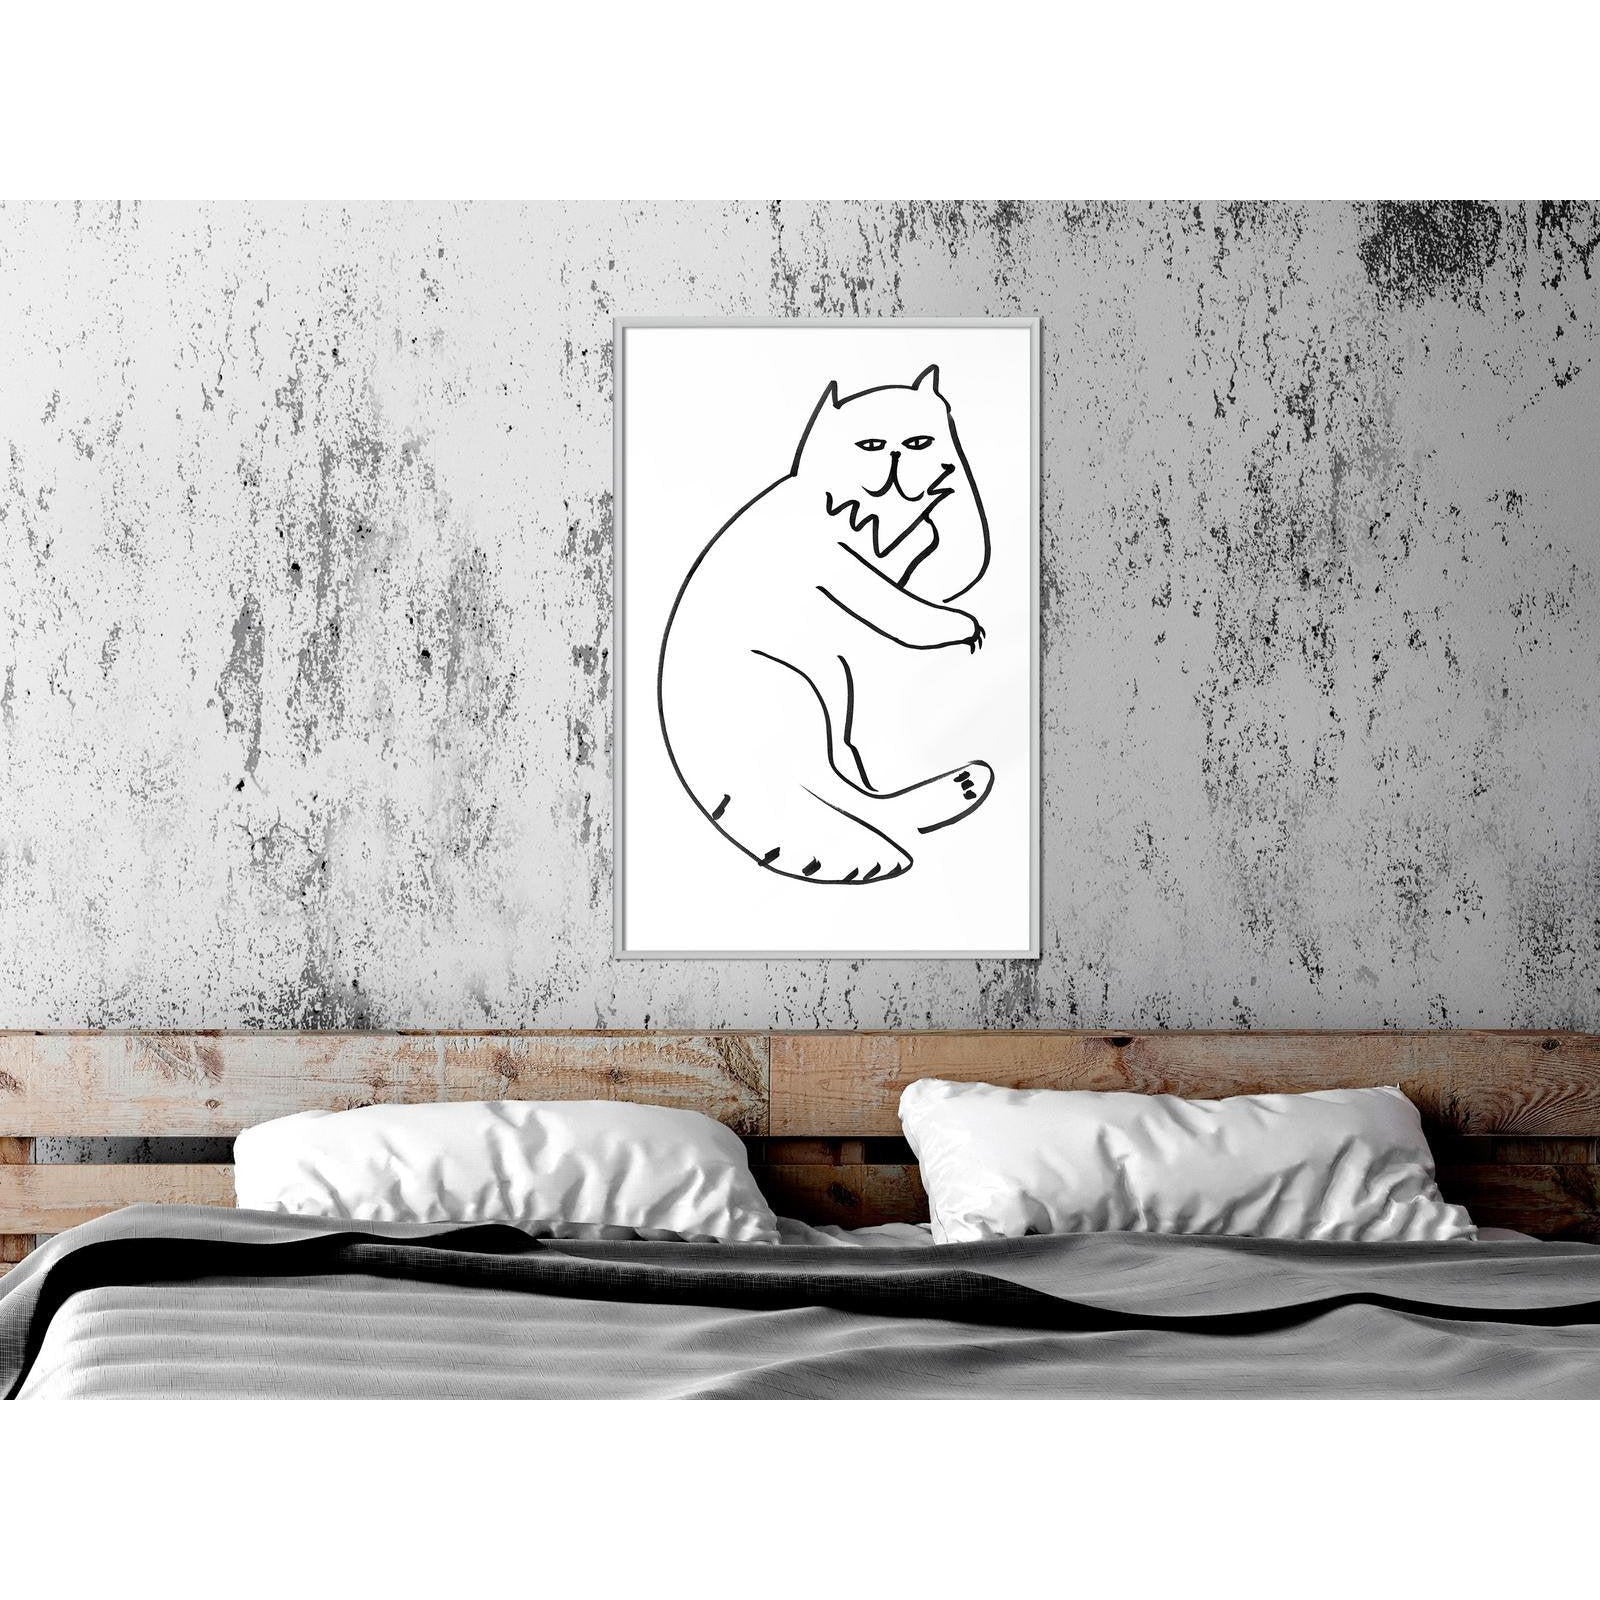 Inramad Poster / Tavla - Fluffy Rest-Poster Inramad-Artgeist-peaceofhome.se